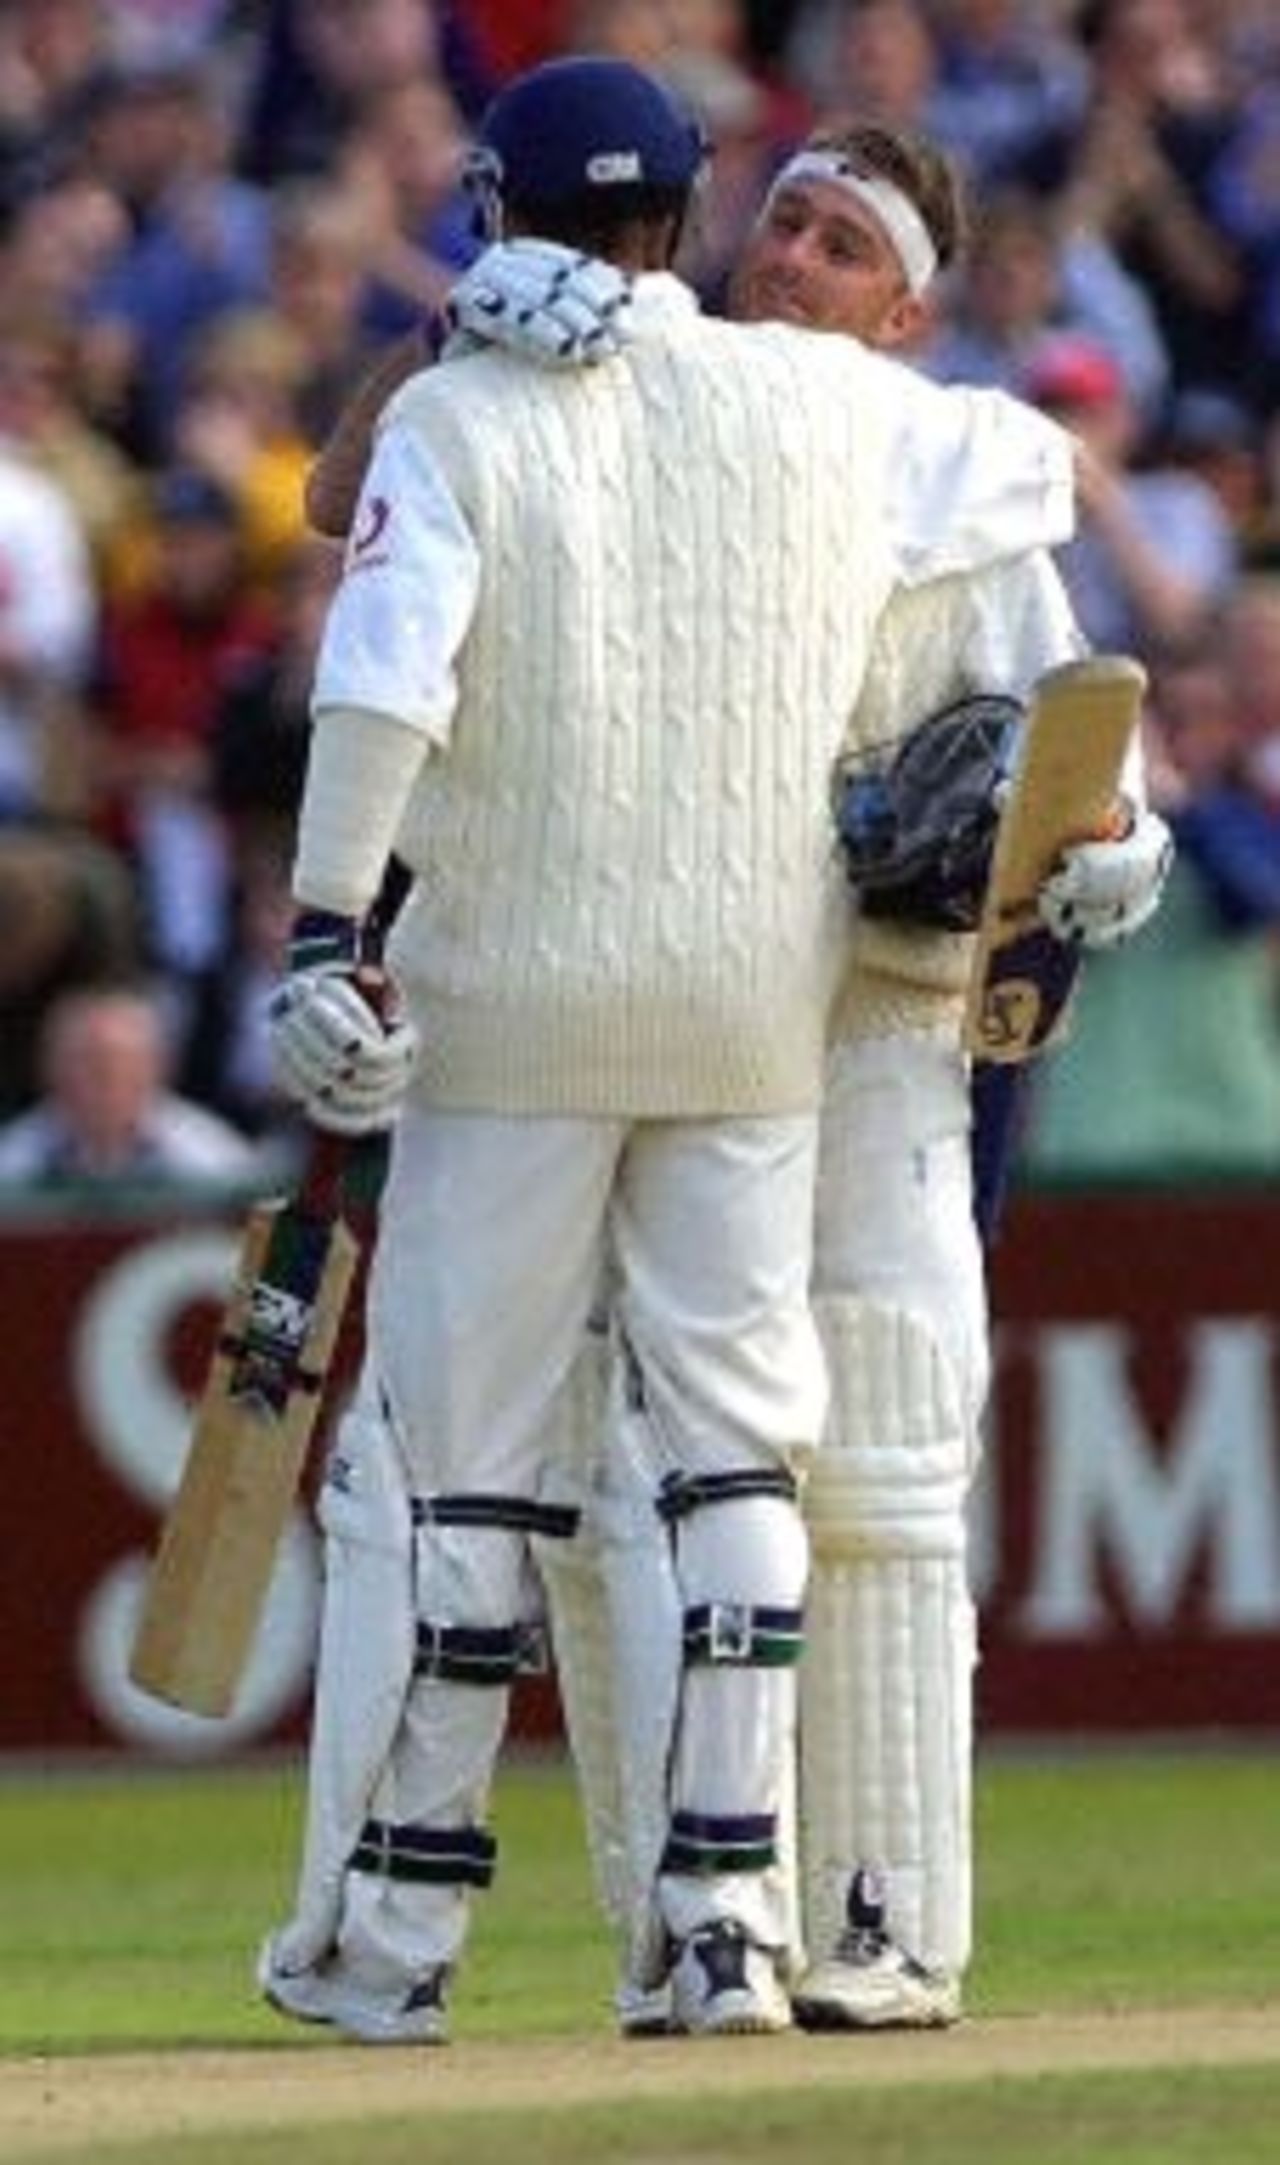 Michael Vaughan congratulates Graham Thorpe on his century, day 3, 2nd Test at Old Trafford, 17-21 May 2001.